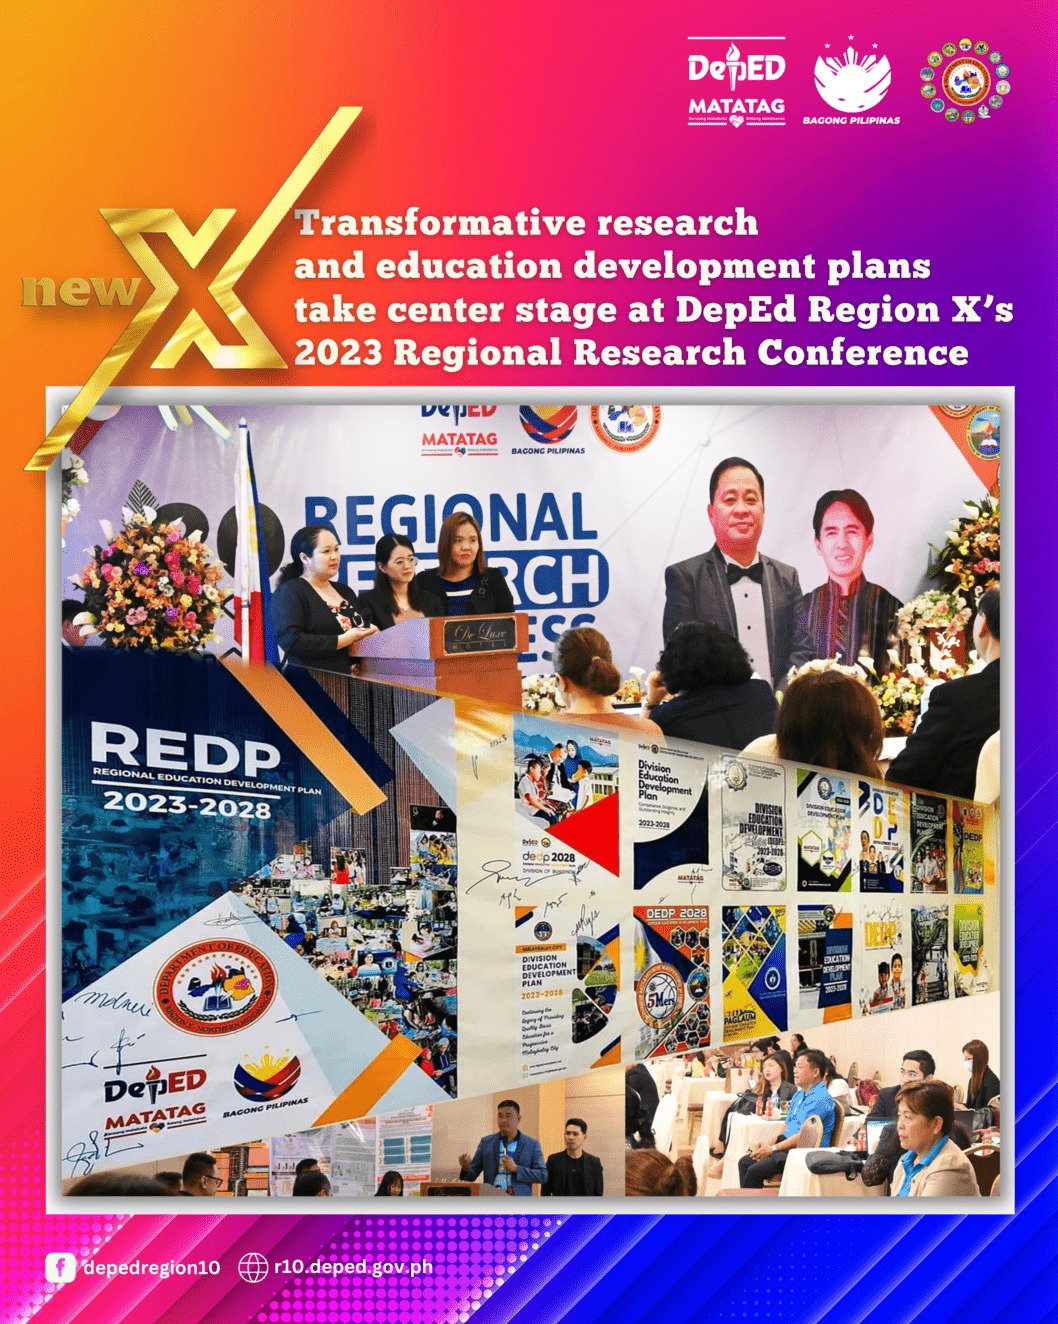 Transformative research and education development plans take center stage at DepEd Region X’s 2023 Regional Research Conference